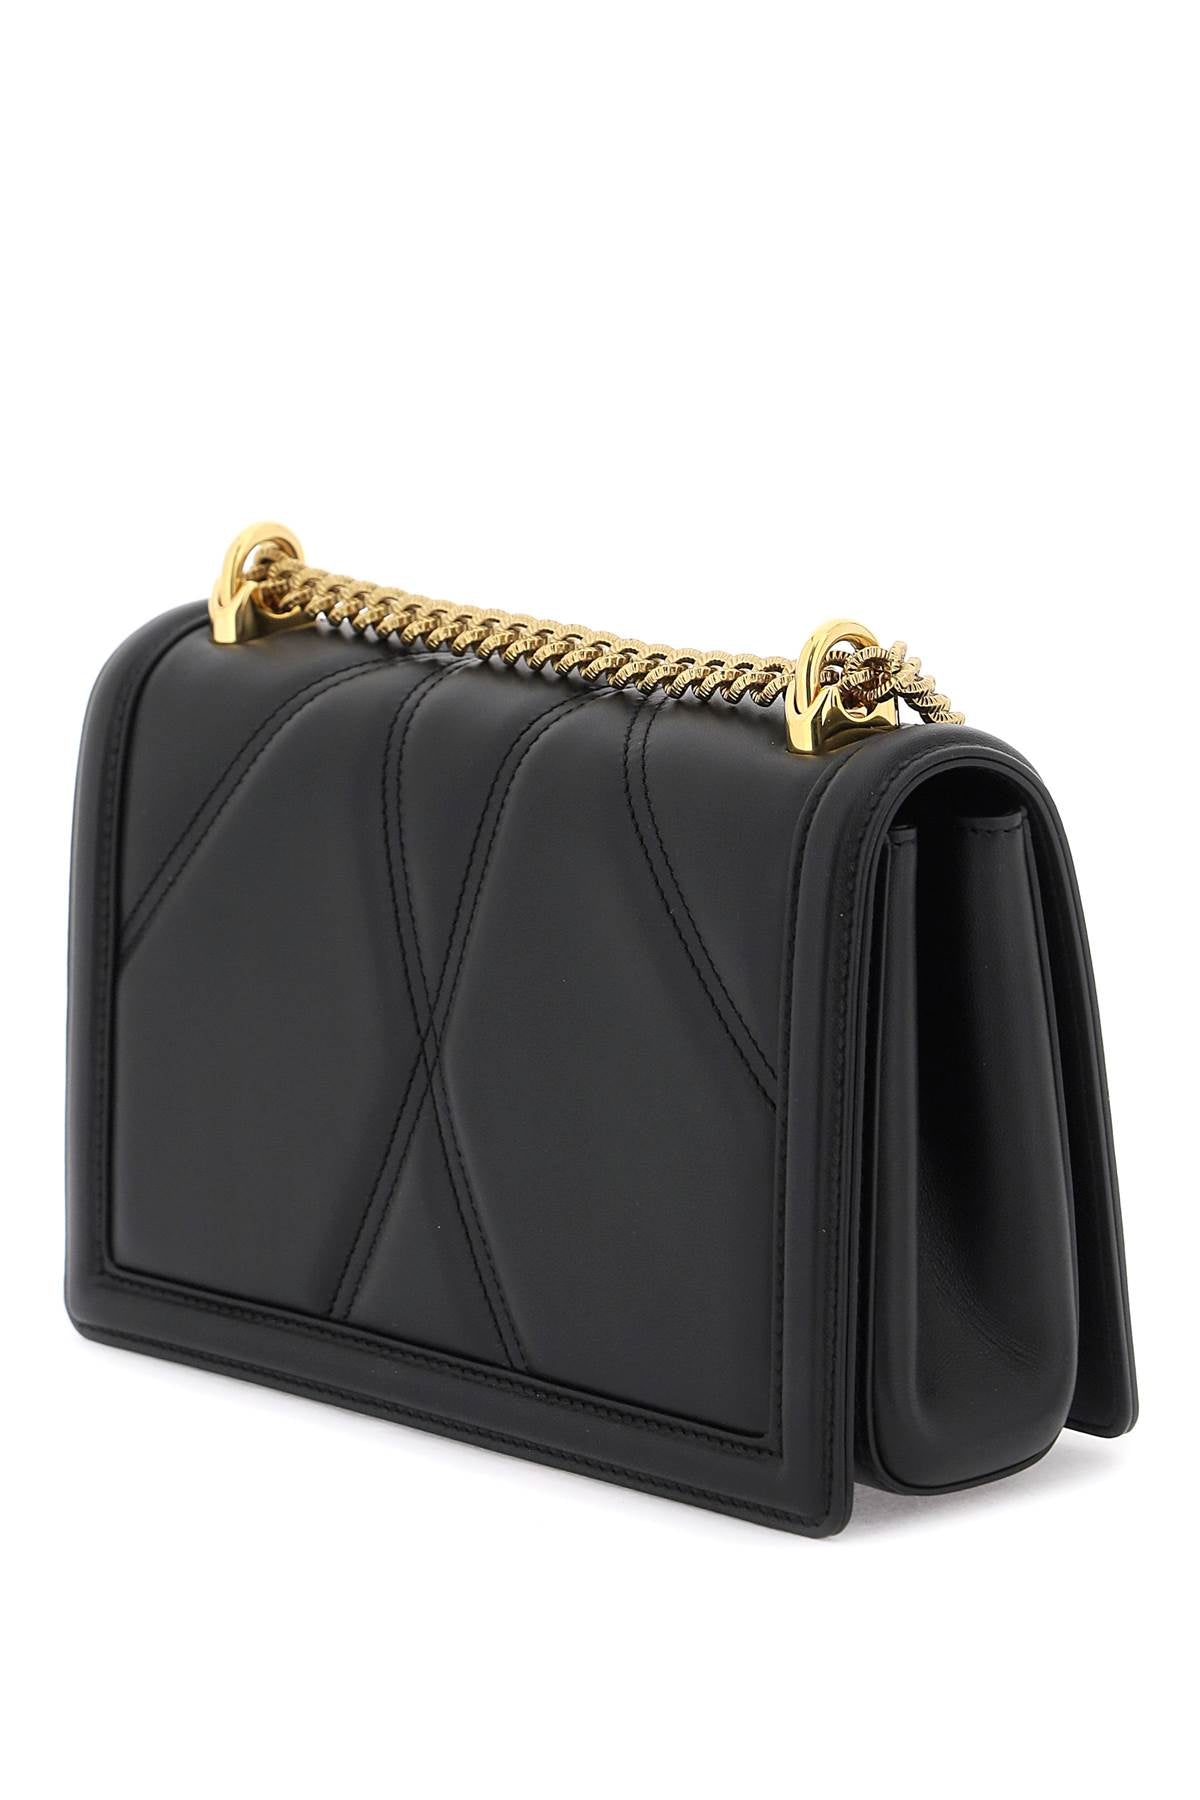 Dolce & gabbana medium devotion bag in quilted nappa leather-1